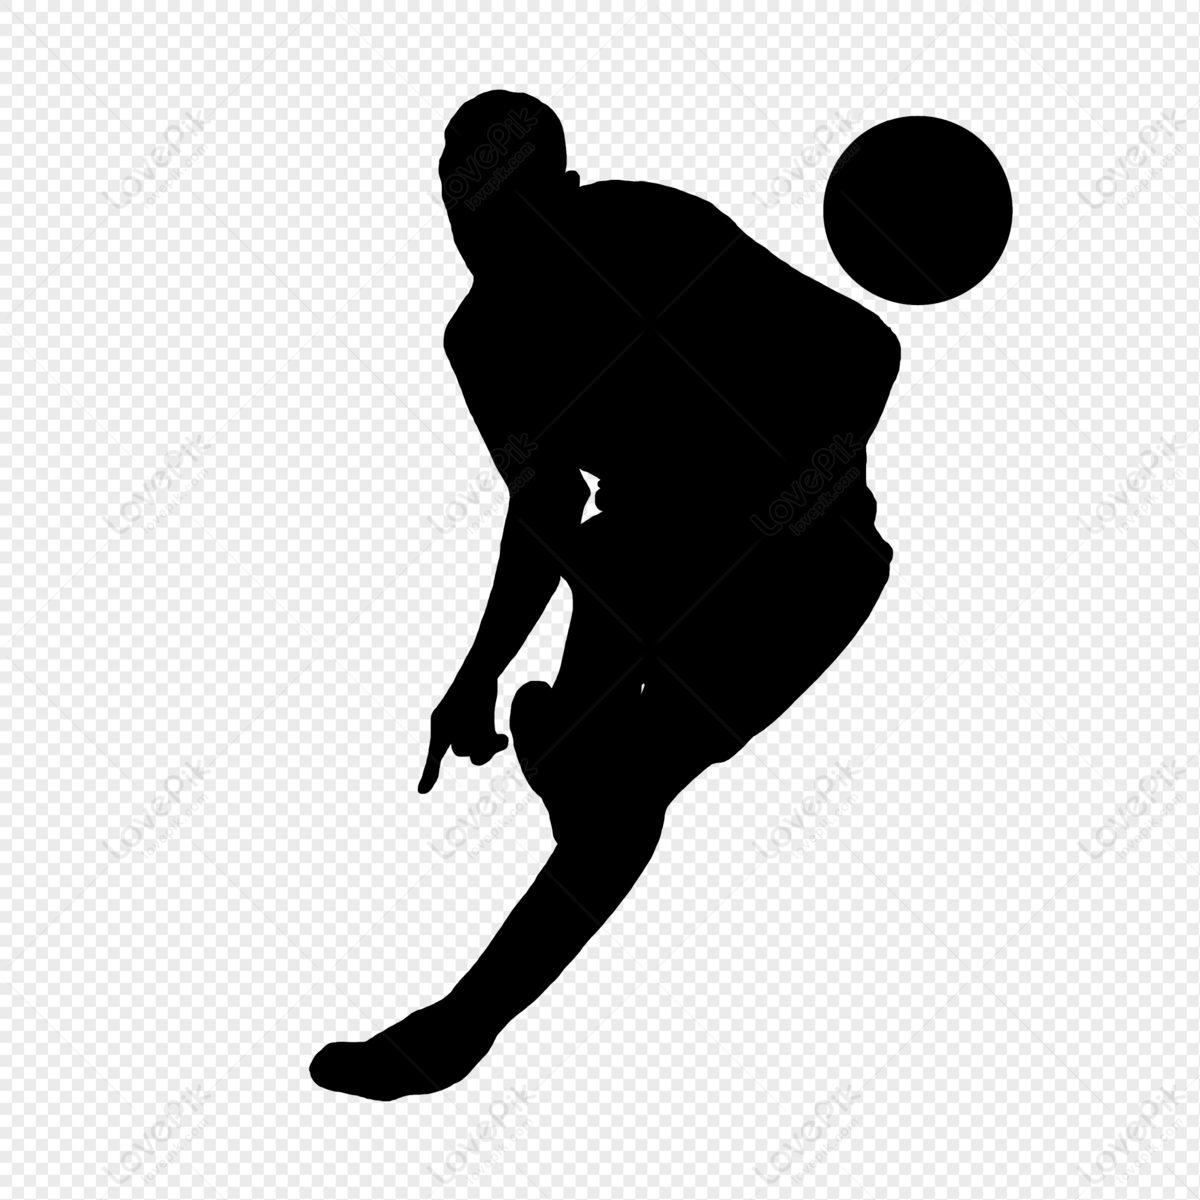 Kicking Sport Silhouette Free PNG And Clipart Image For Free Download ...